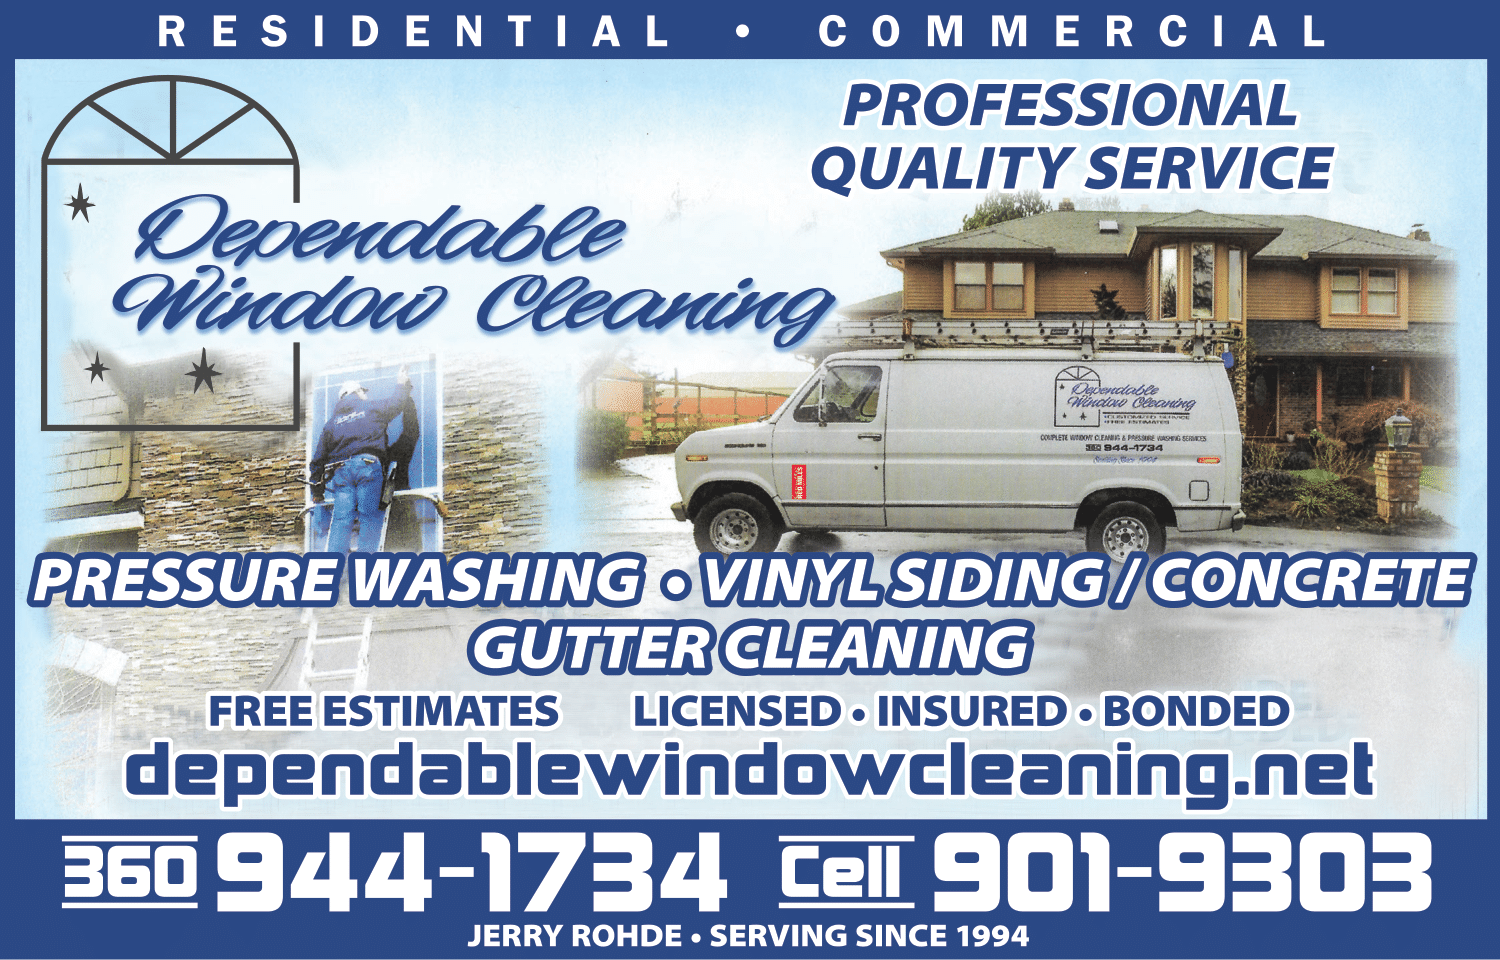 Dependable Window Cleaning Service Flier